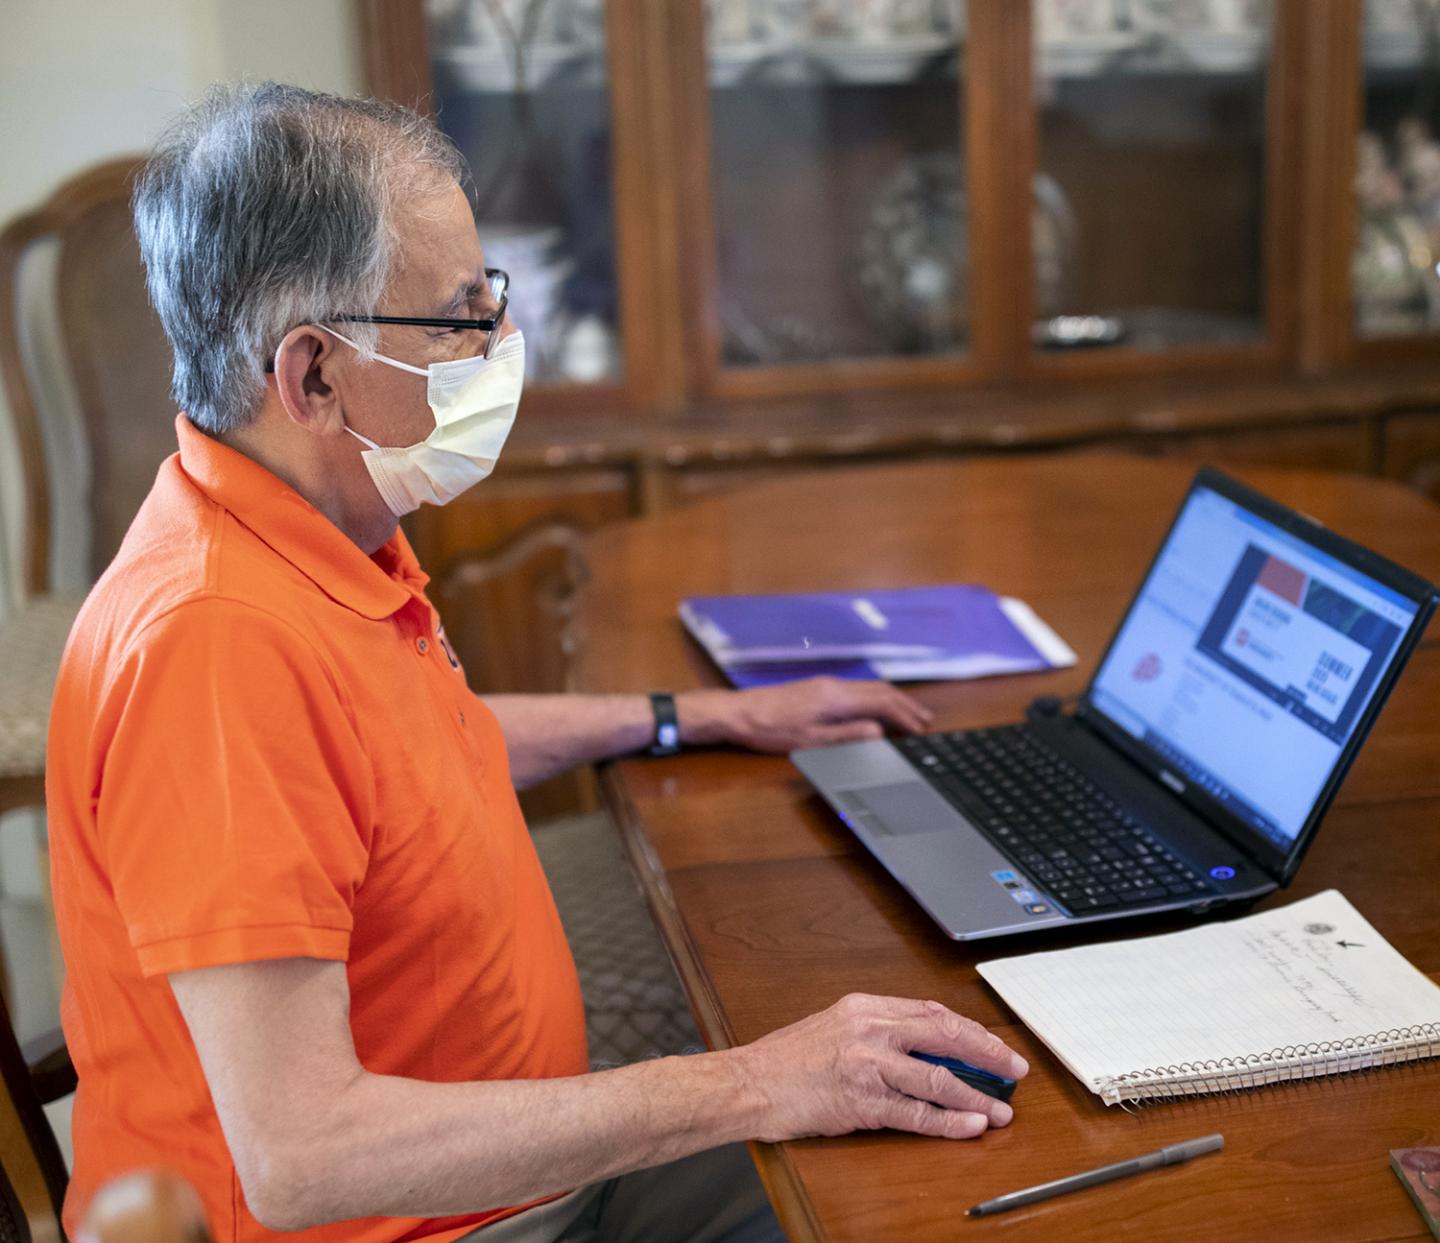 UTEP and Partners Awarded $1.5M NSF Grant to Improve QOL for Senior Citizens